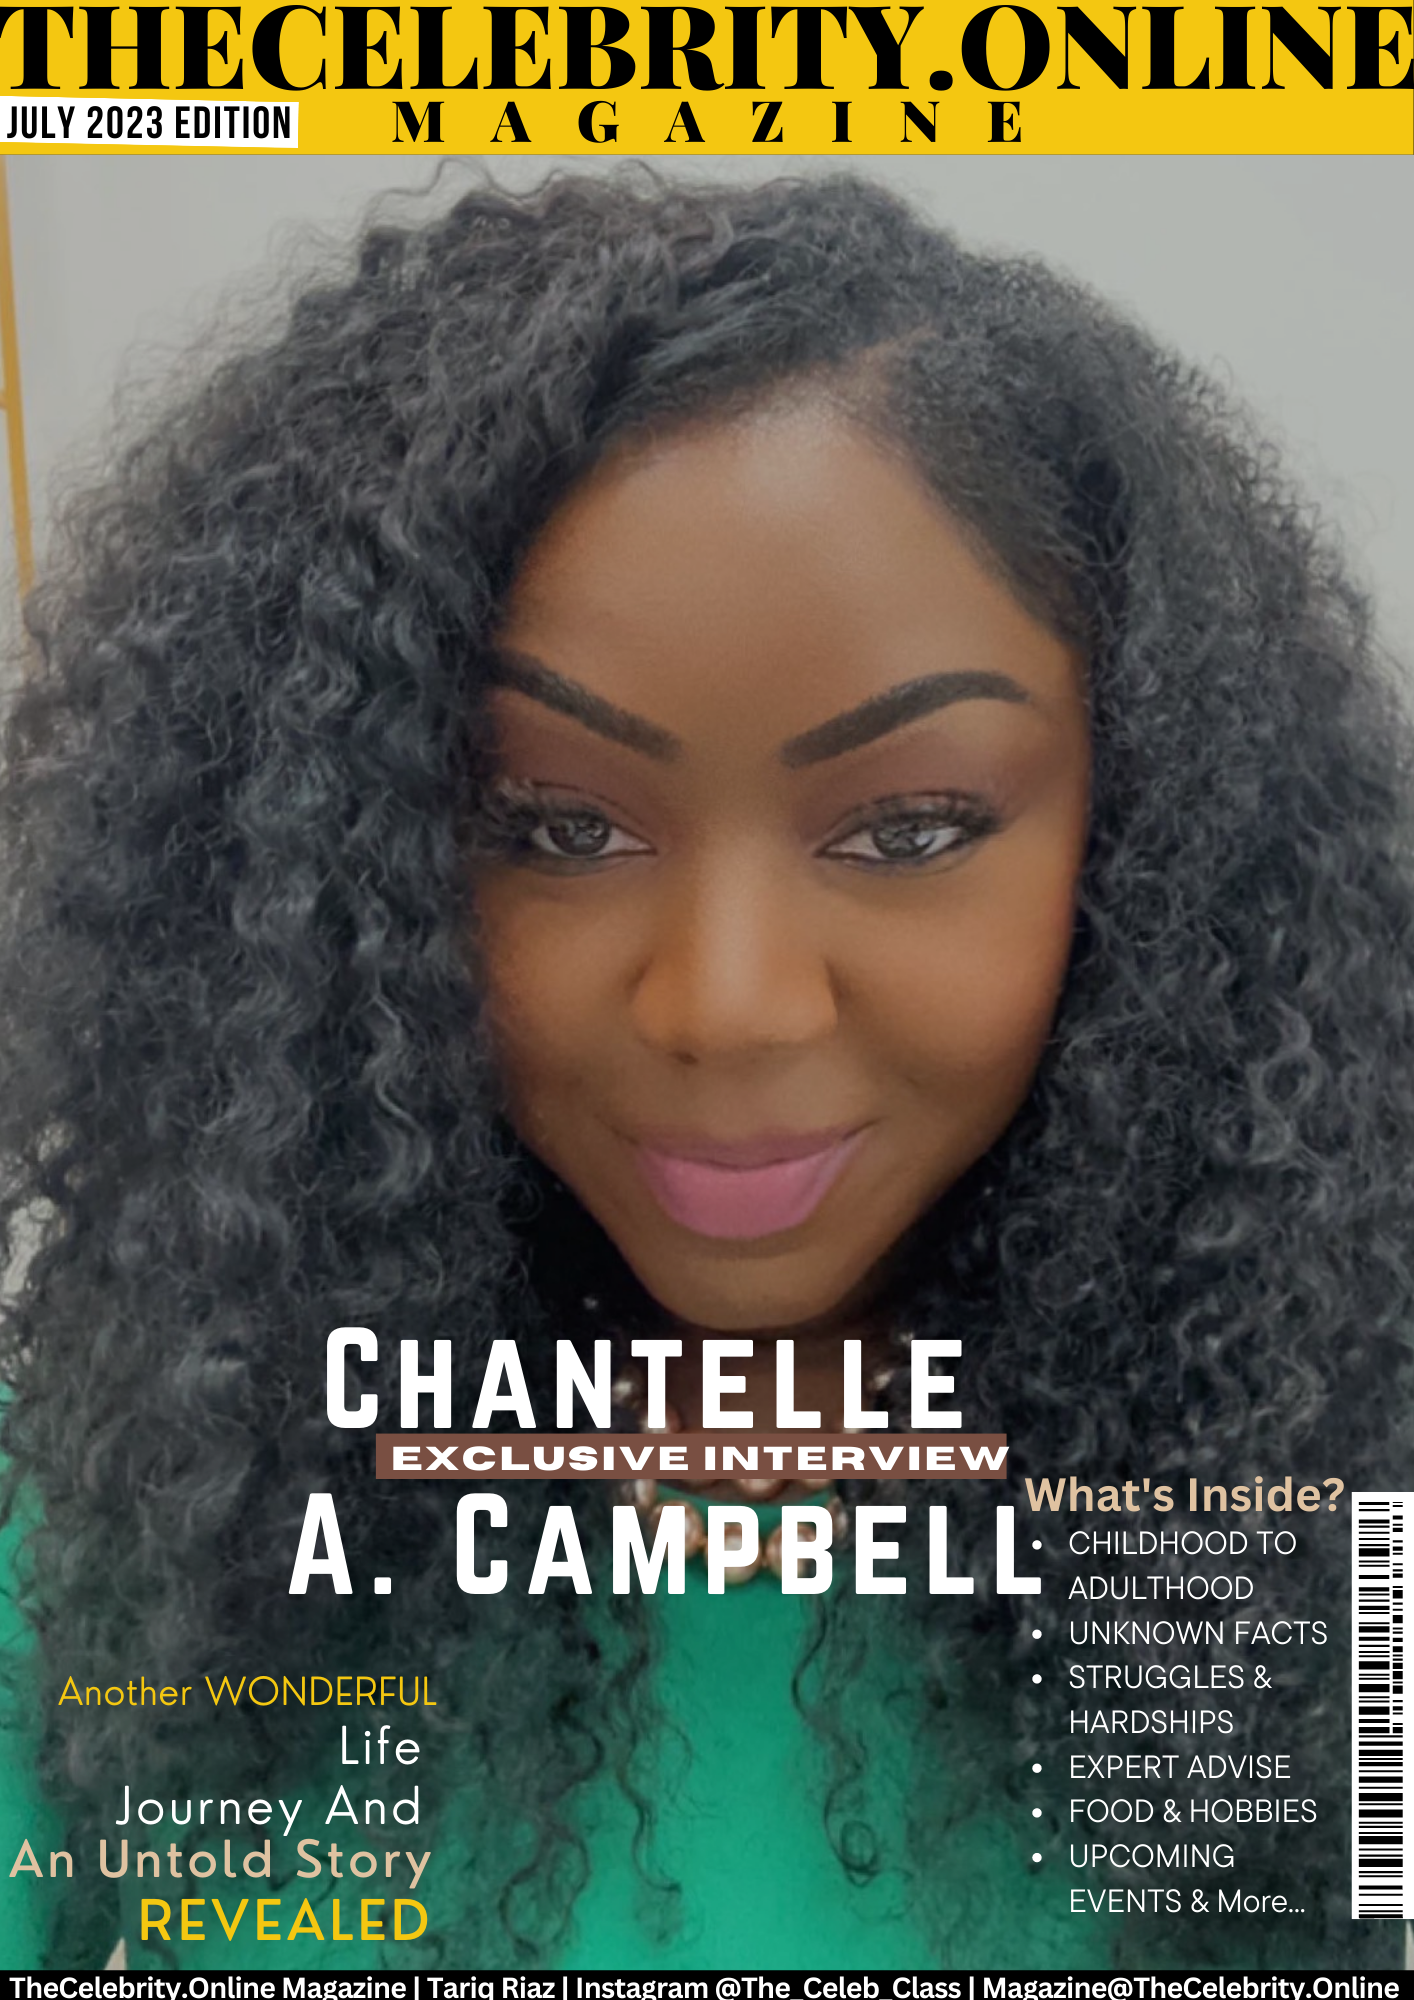 Chantelle A. Campbell Exclusive Interview – ‘Stay Authentic And Cultivate A Lasting Influence’